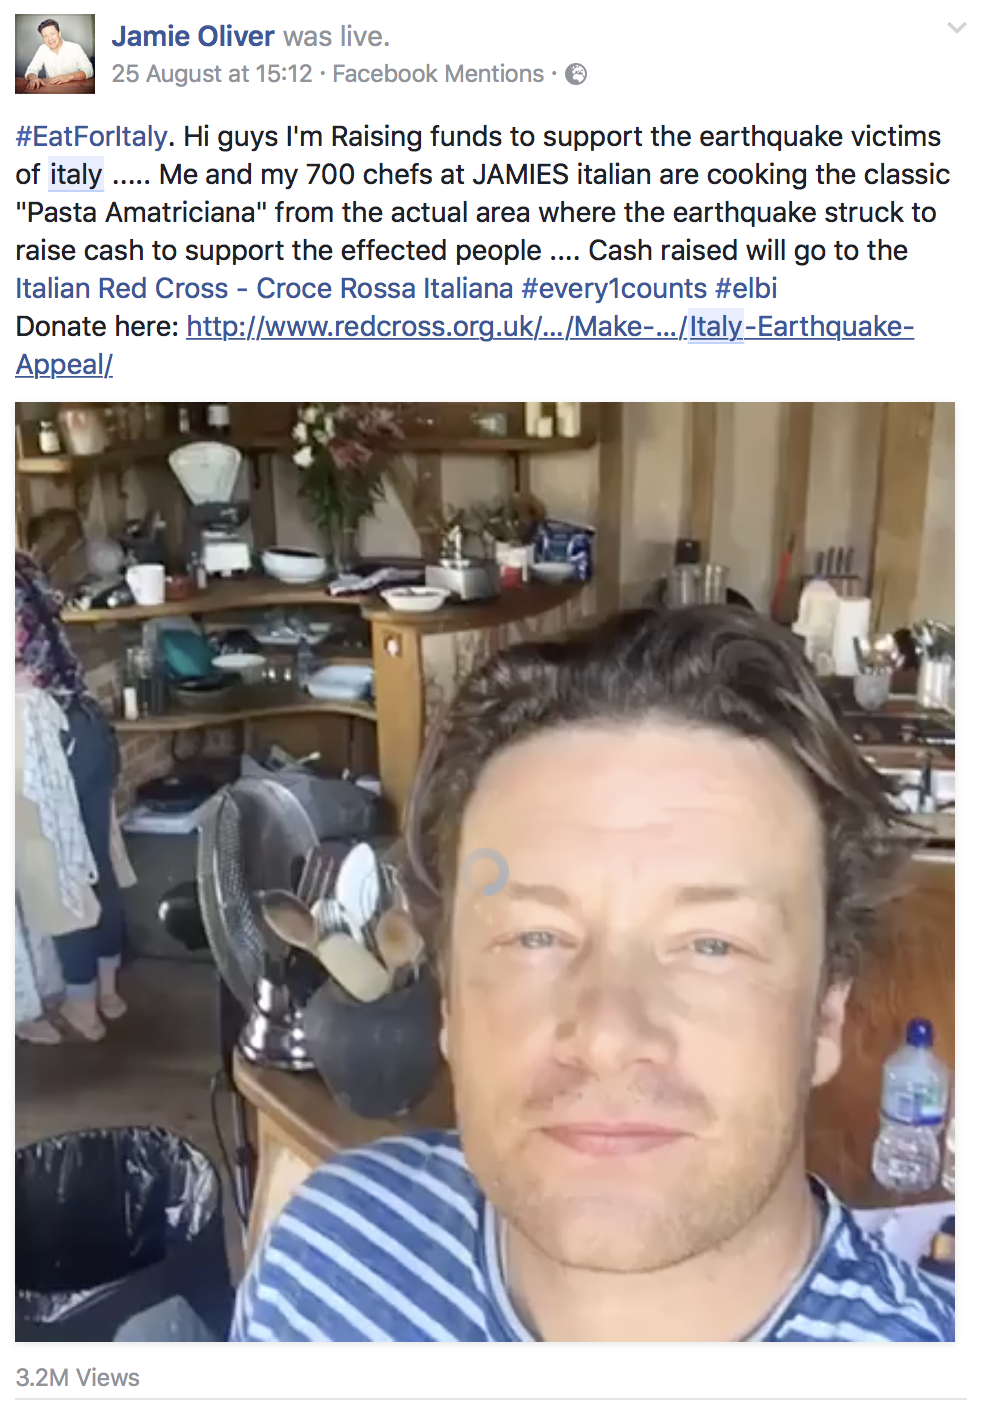 Jamie Oliver raises funds for the Amatrice earthquake